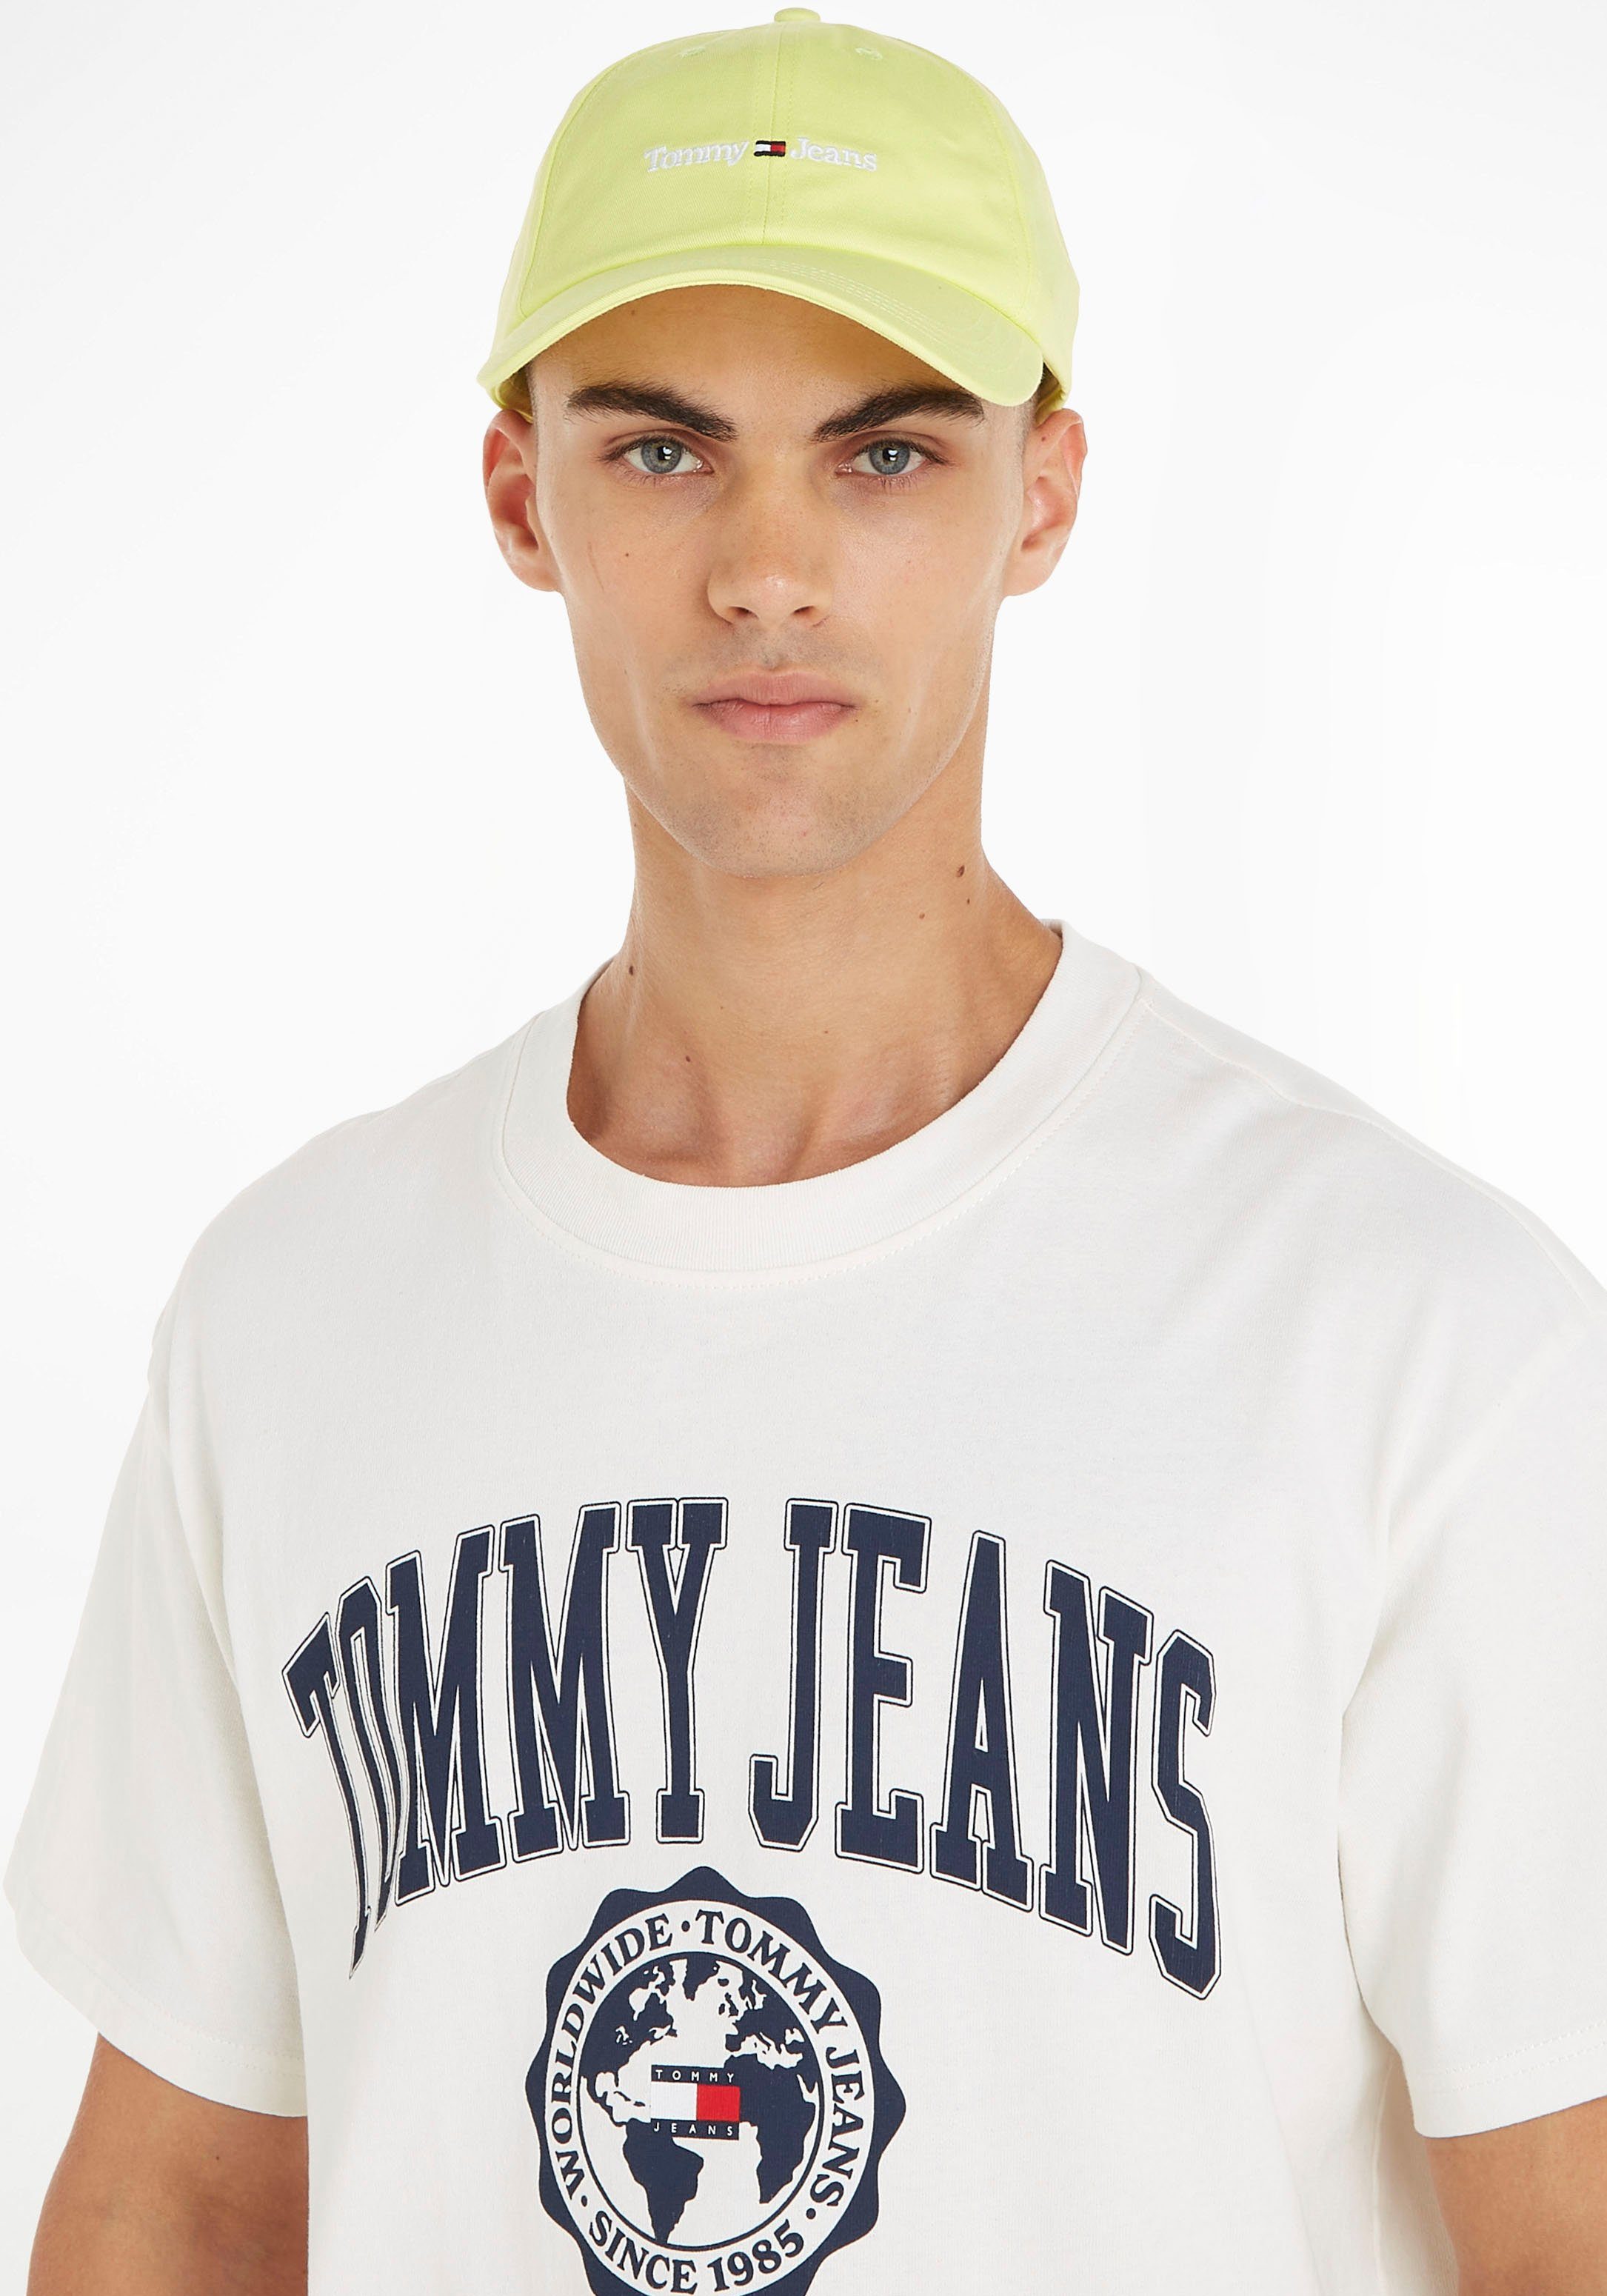 Tommy mit Jeans Cap Jeans limone Logostickerei Baseball Tommy